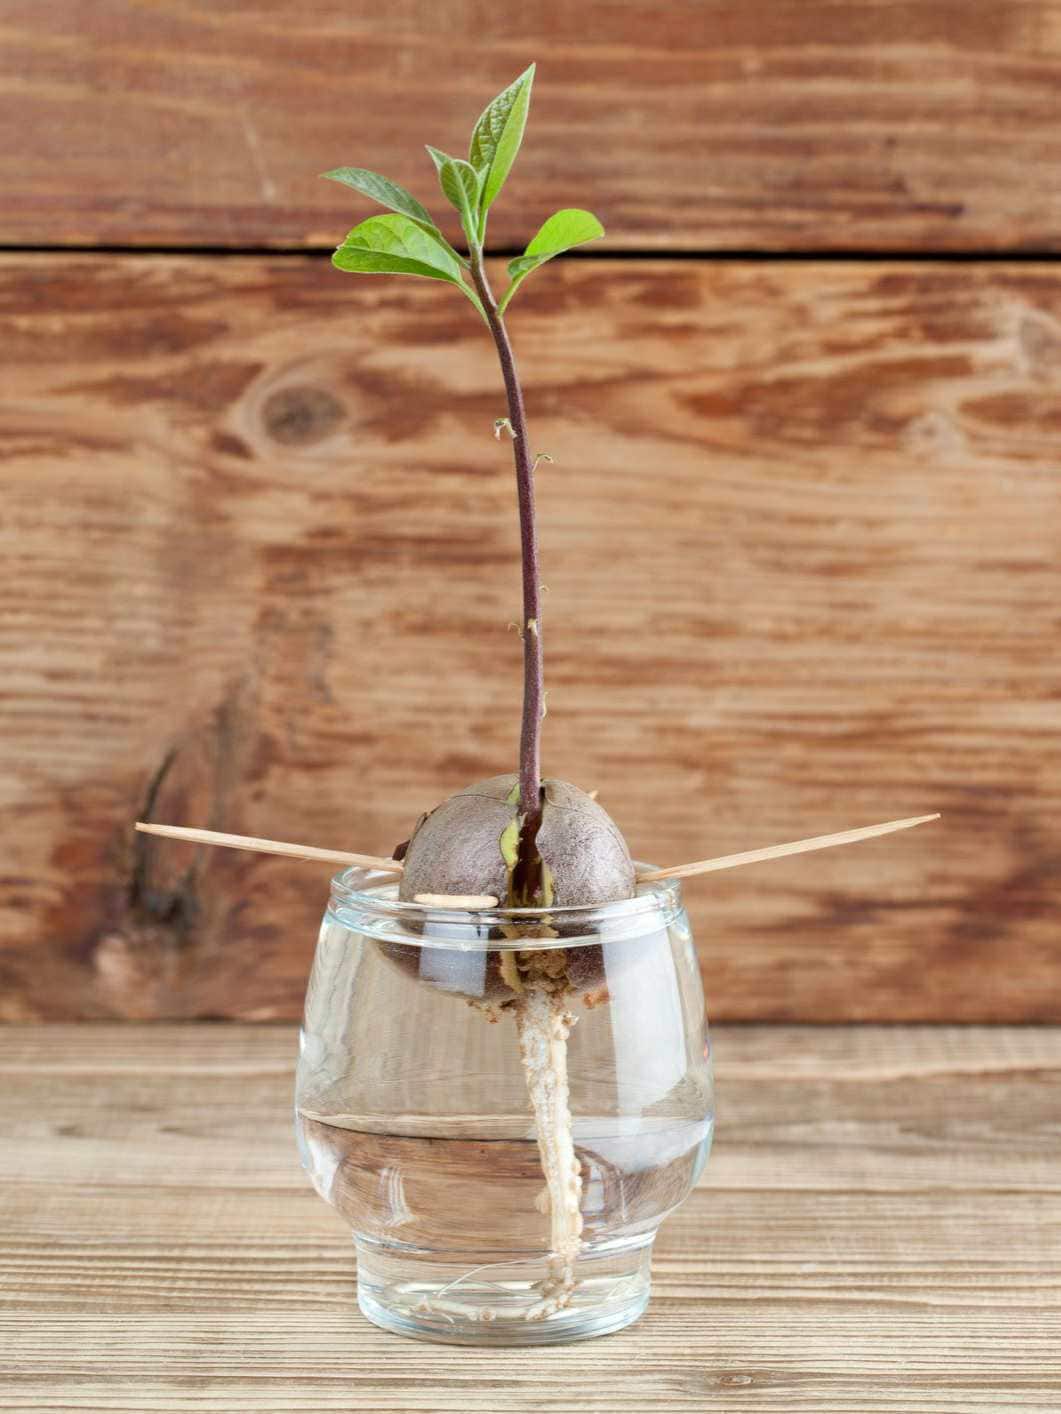 An avocado pit is shown half submerged in a glass of water. There are two toothpicks poking out of each side of the pit that keep it from sinking to the bottom of the glass. The bottom of the pit has split open with a tap root protruding from it. Out of the top of the pit a young avocado seedling has emerged stretching upwards towards the light. 